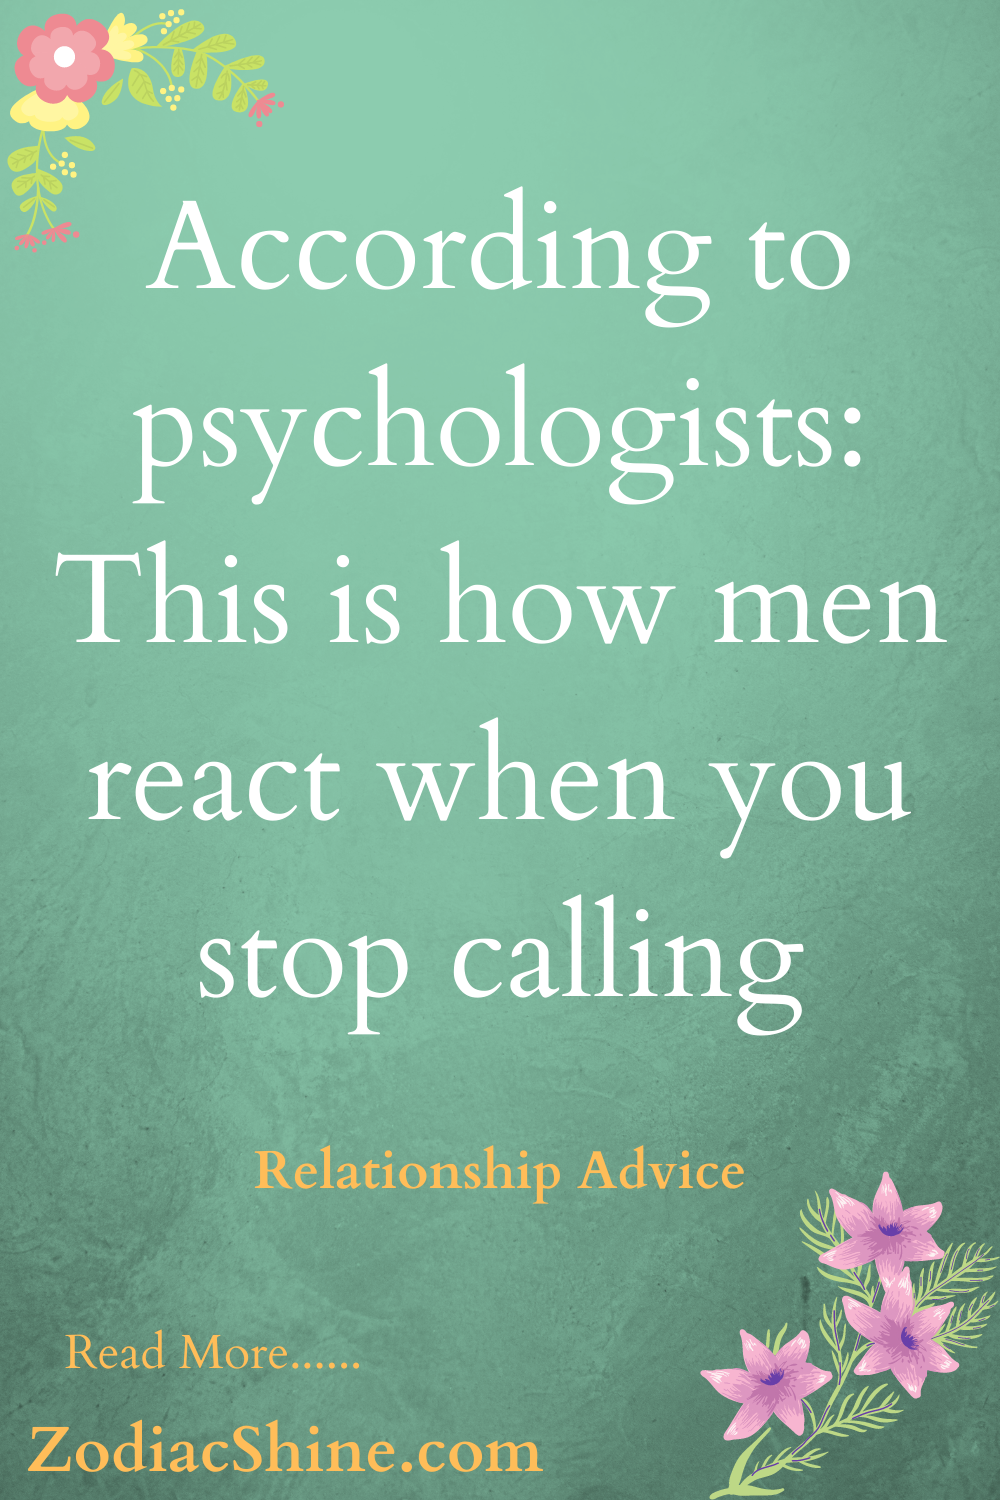 According to psychologists: This is how men react when you stop calling